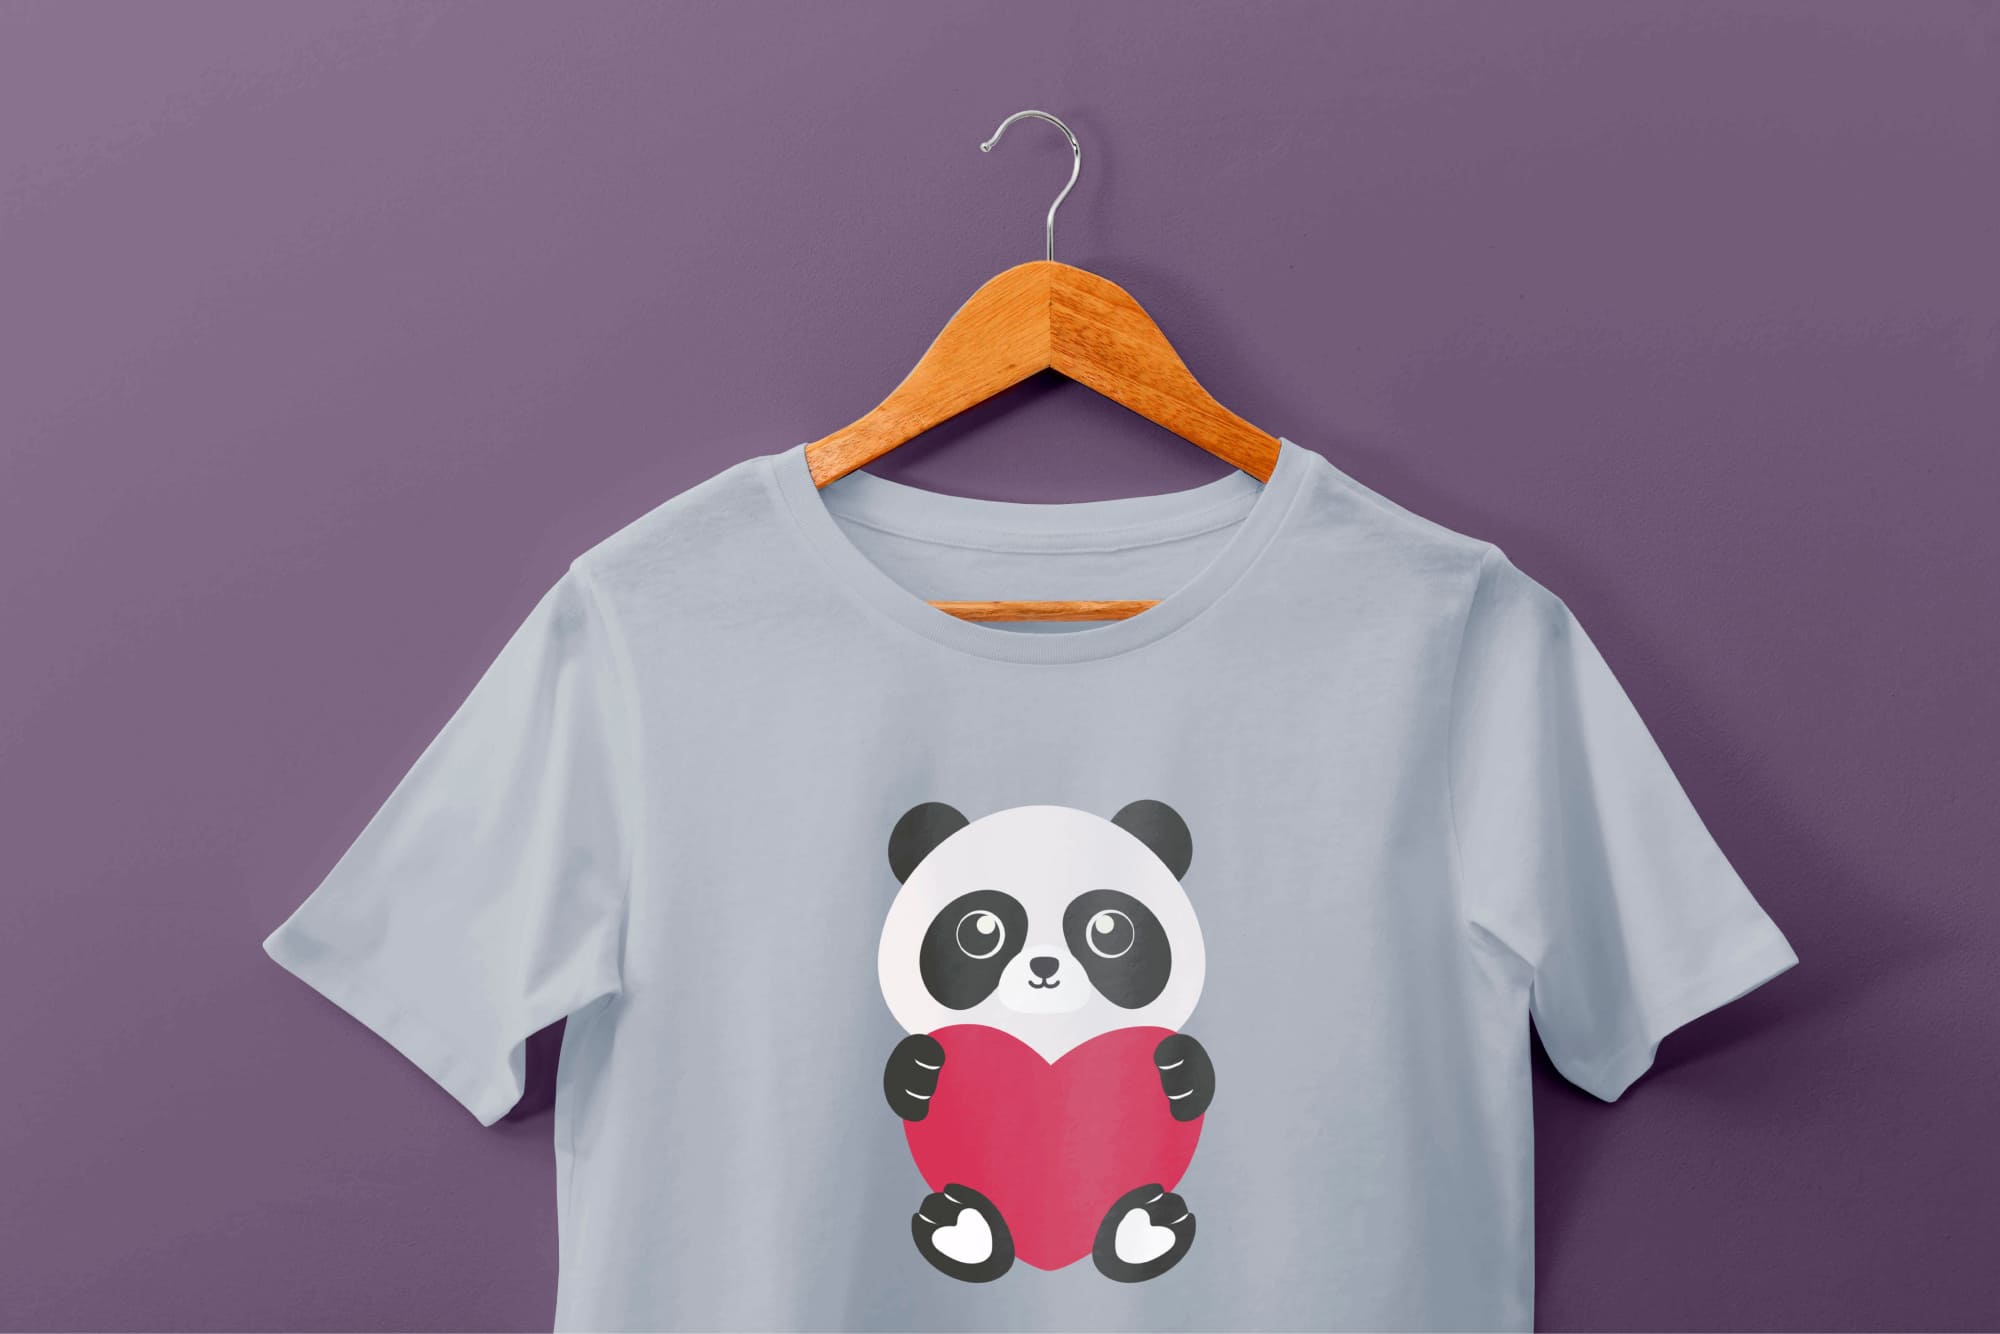 Light blue t-shirt with a panda and pink heart on a hanger on a purple background.